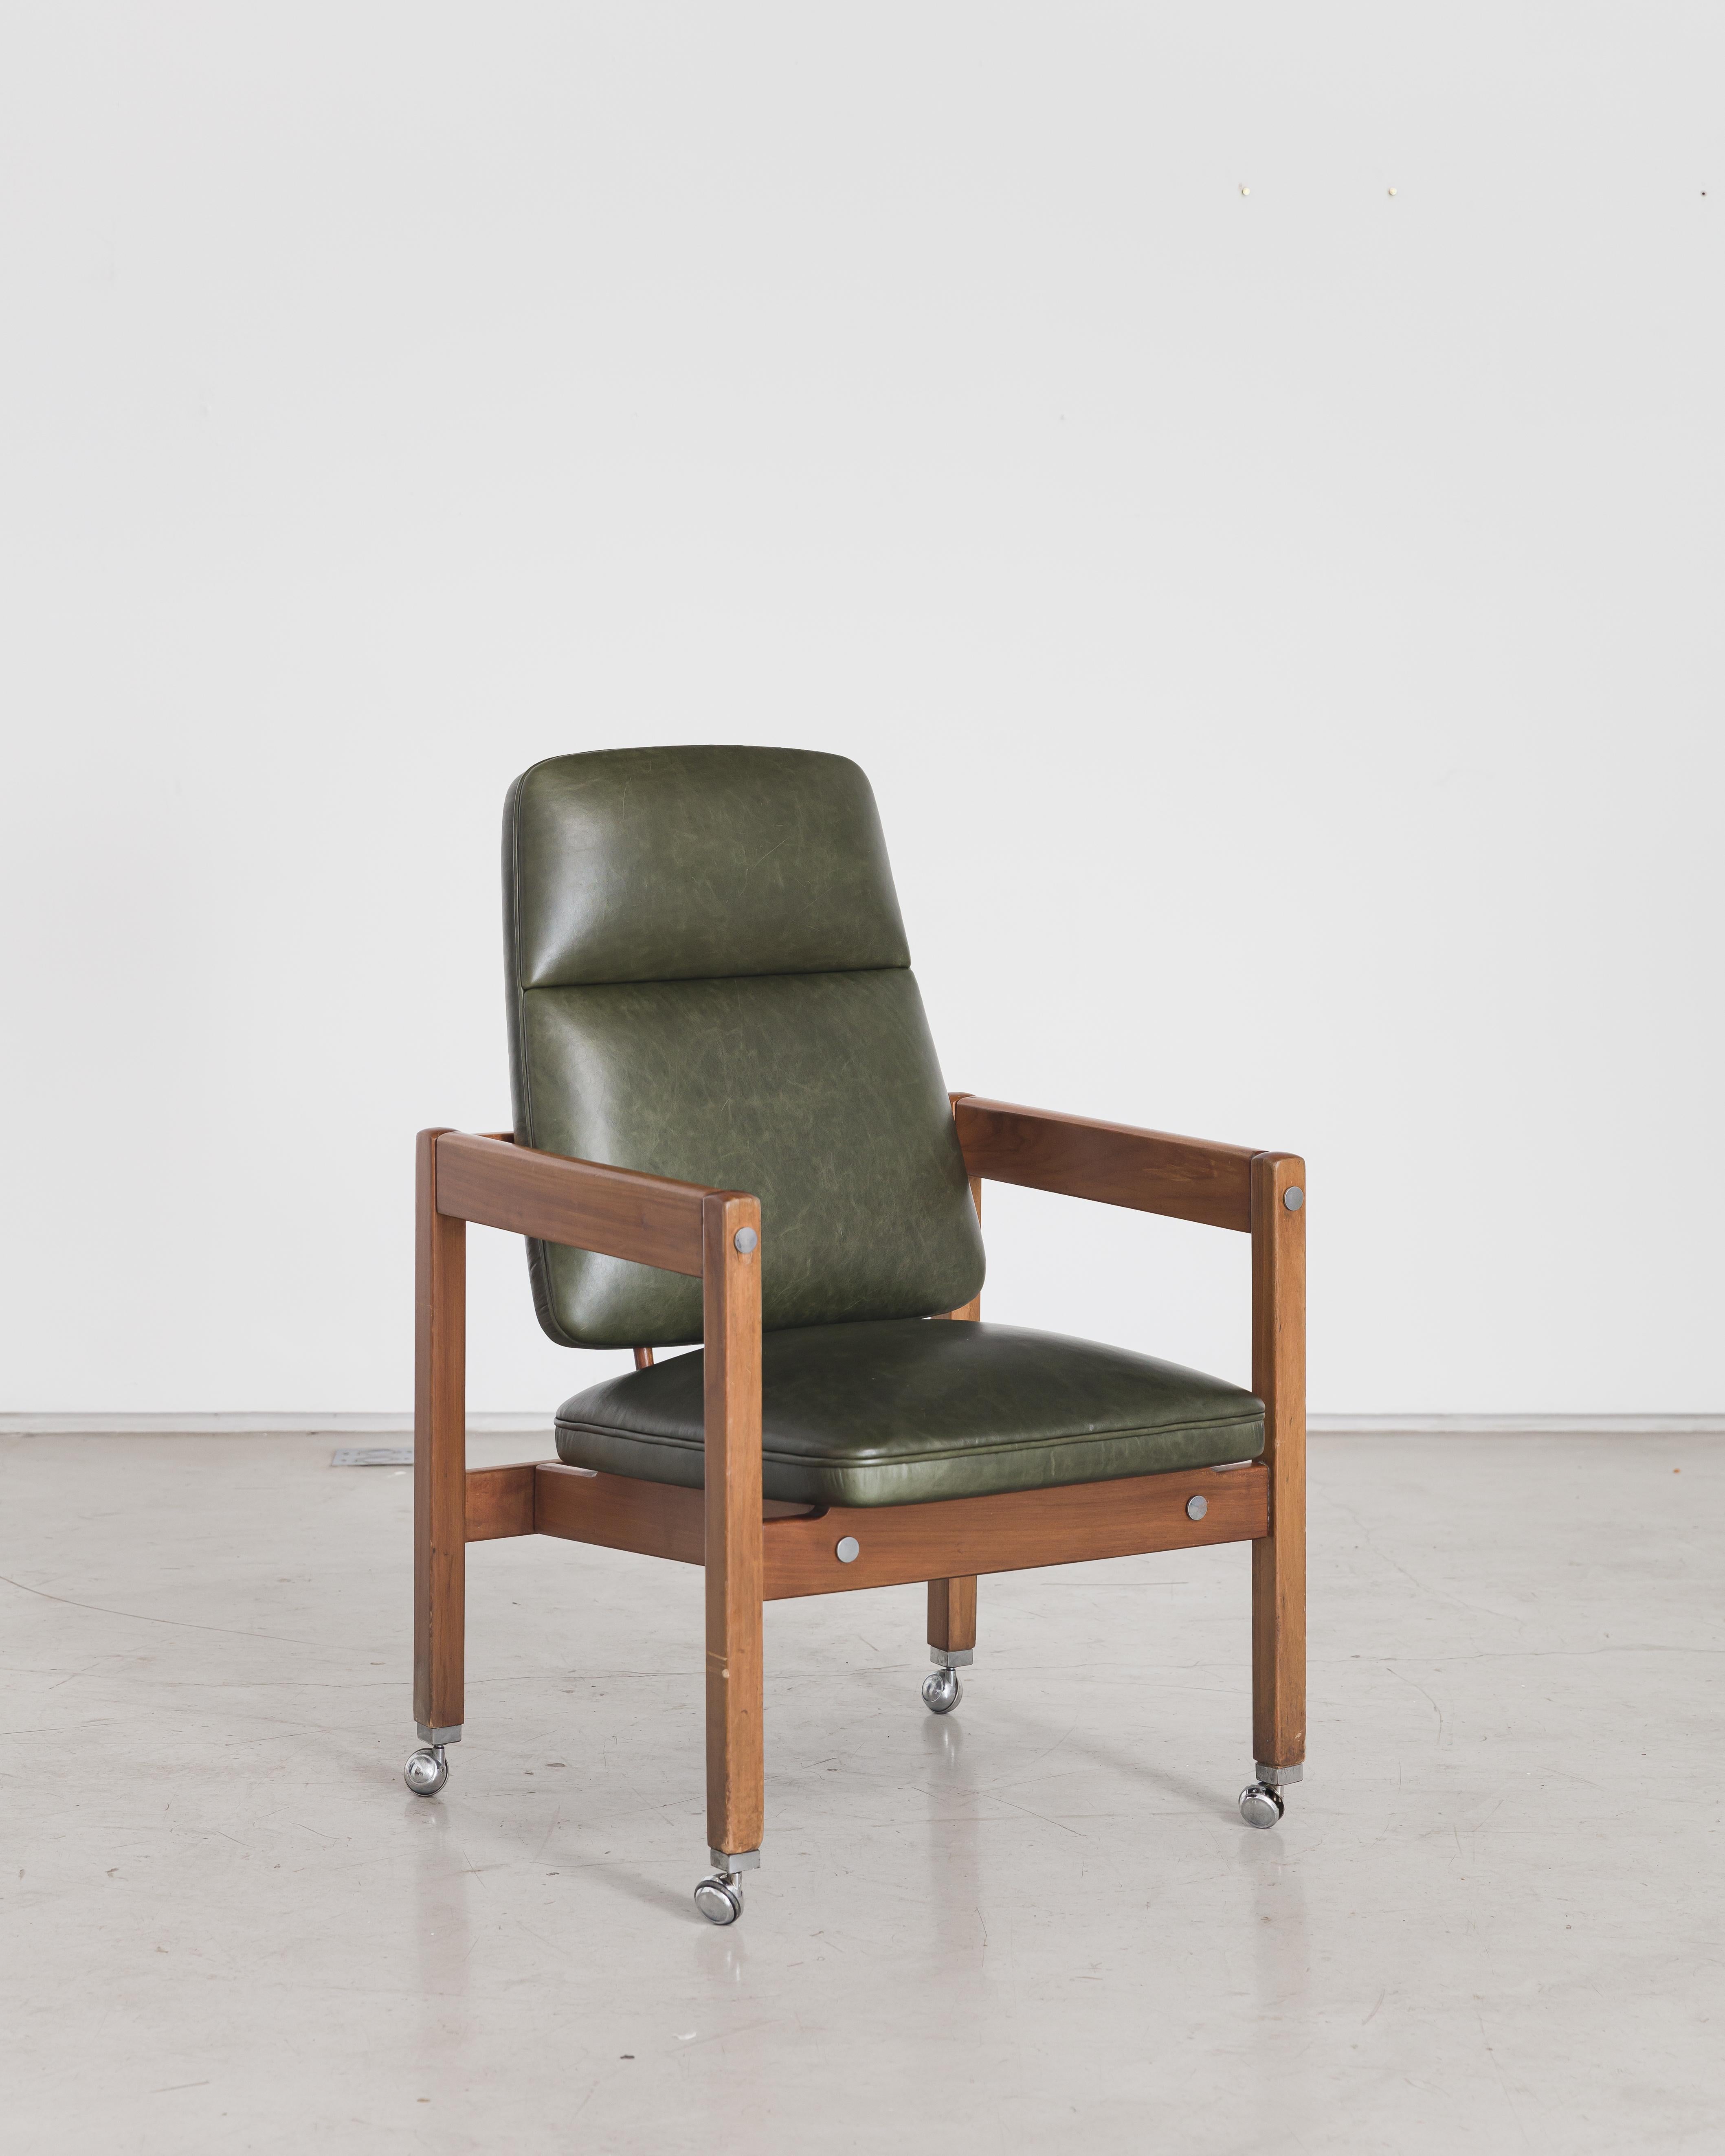 Made in Jacarandá rosewood, this Sergio Rodrigues piece has originally upholstered in green leather, circular chrome accents, and chrome casters. This chair was created to furnish the Palacio dos Arcos Building, Ministry of Foreign Affairs, in